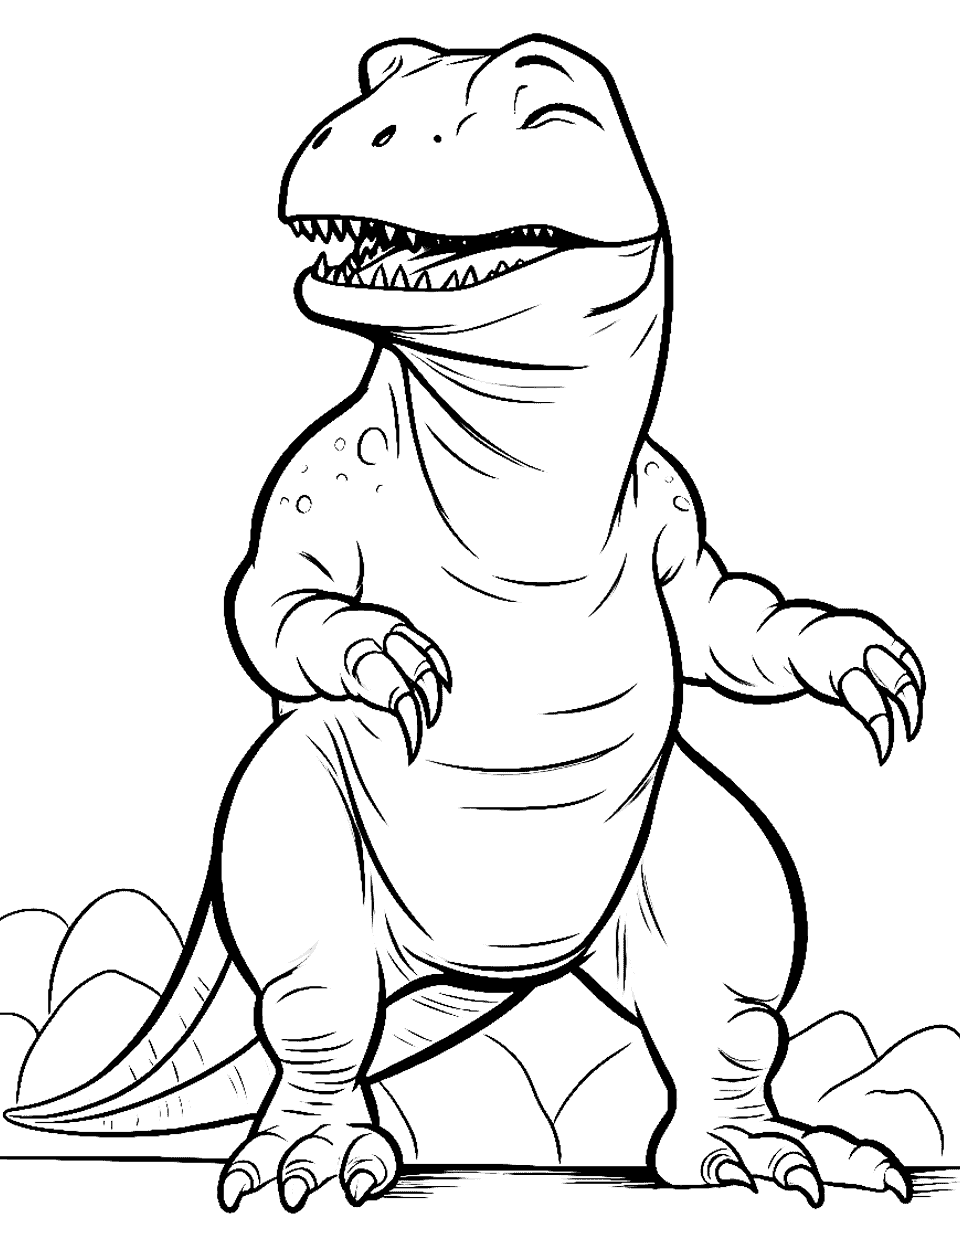 Funny T Rex T-rex Coloring Page - A happy T-Rex standing and laughing with a big grin.